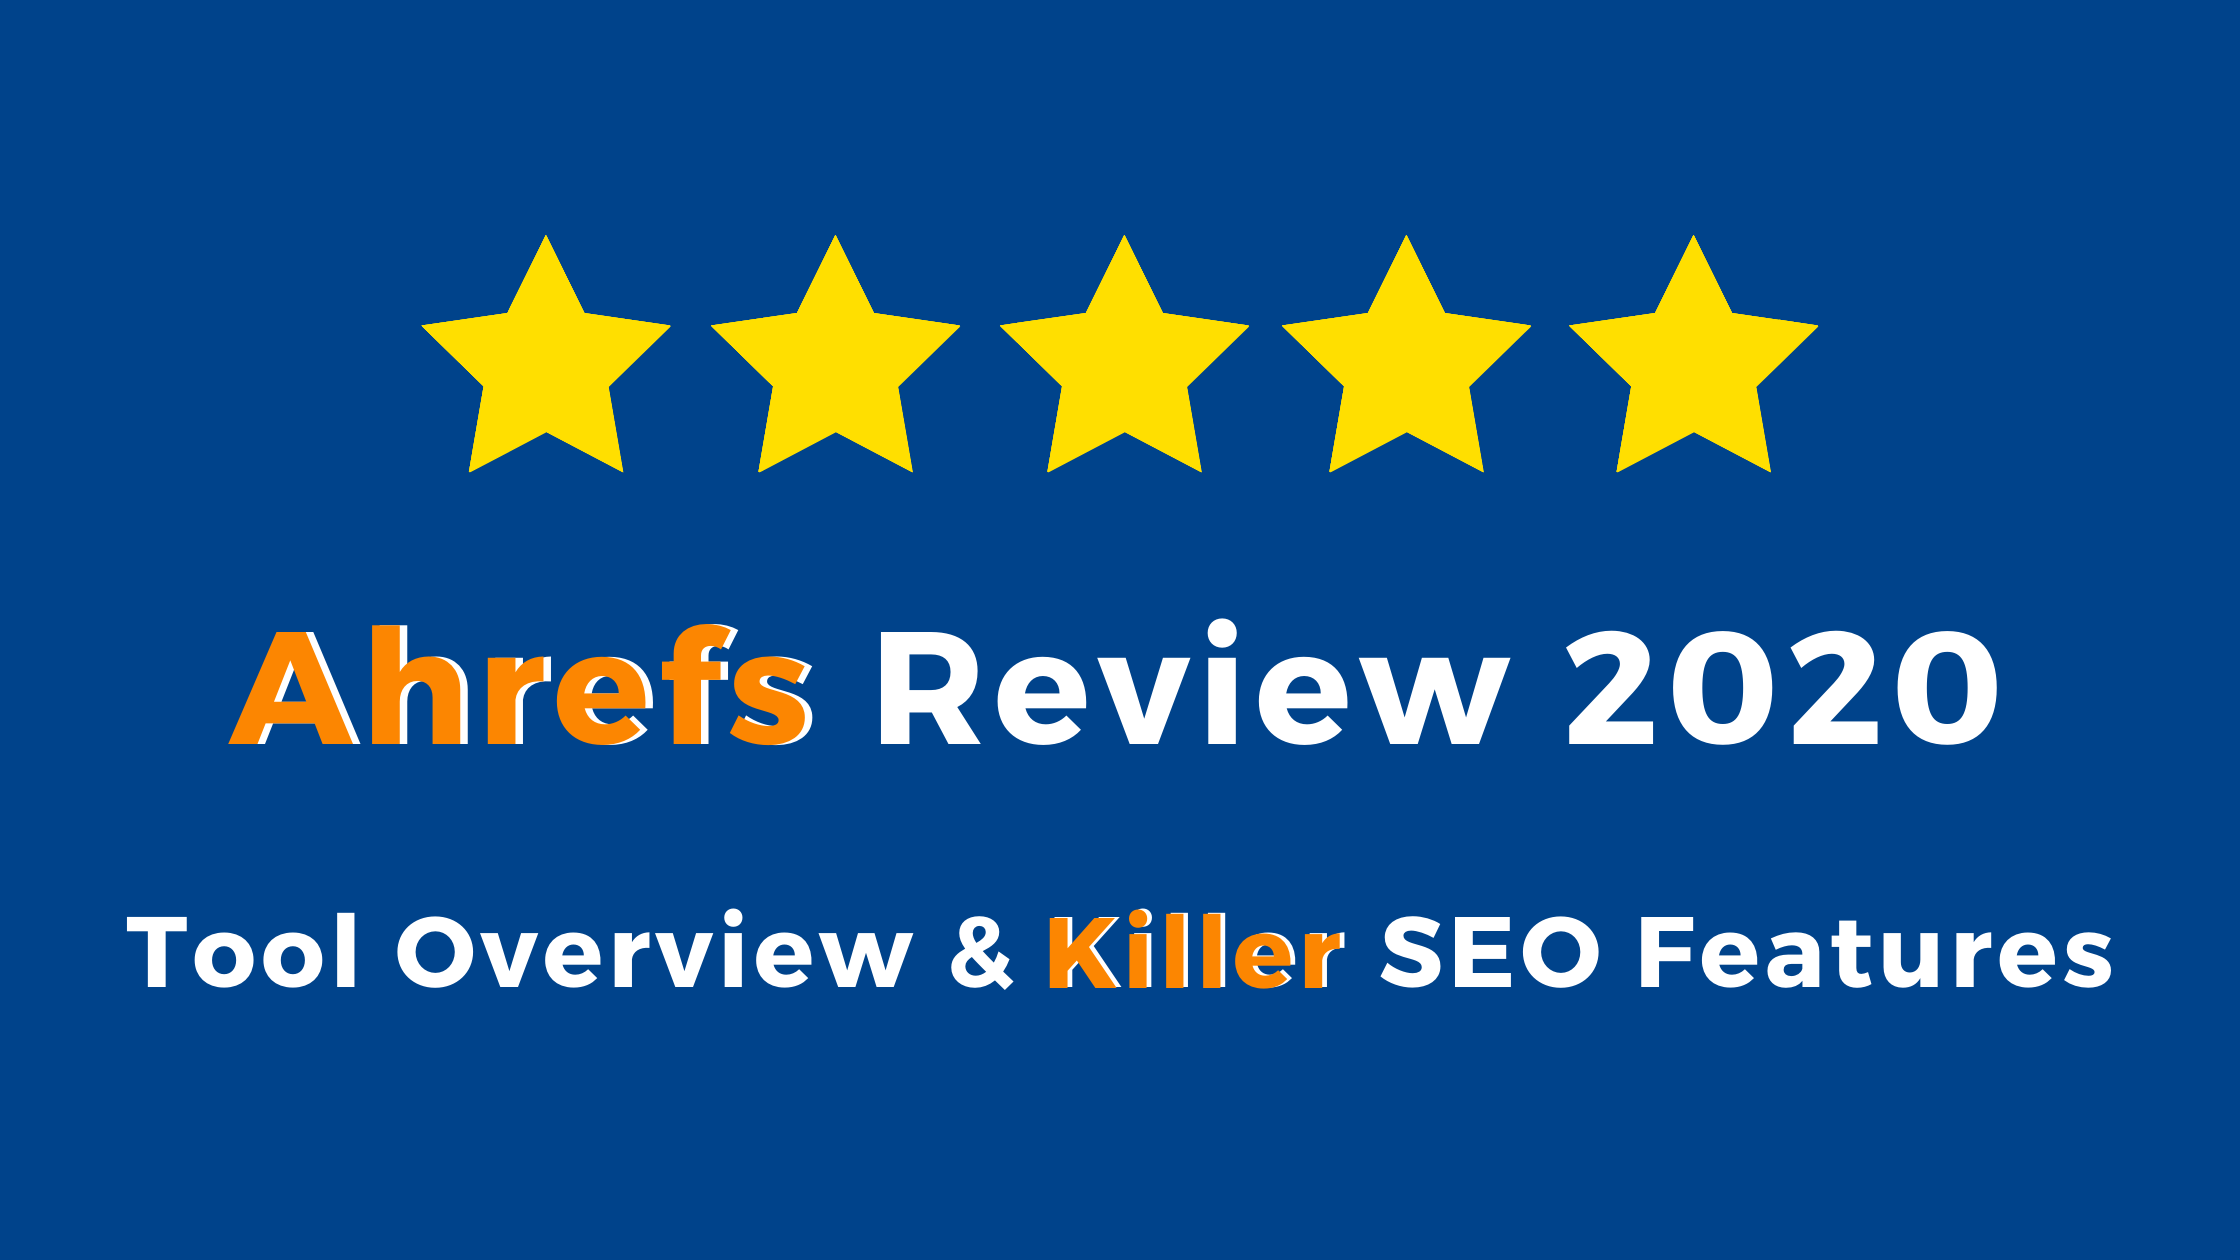 Ahrefs Review 2020